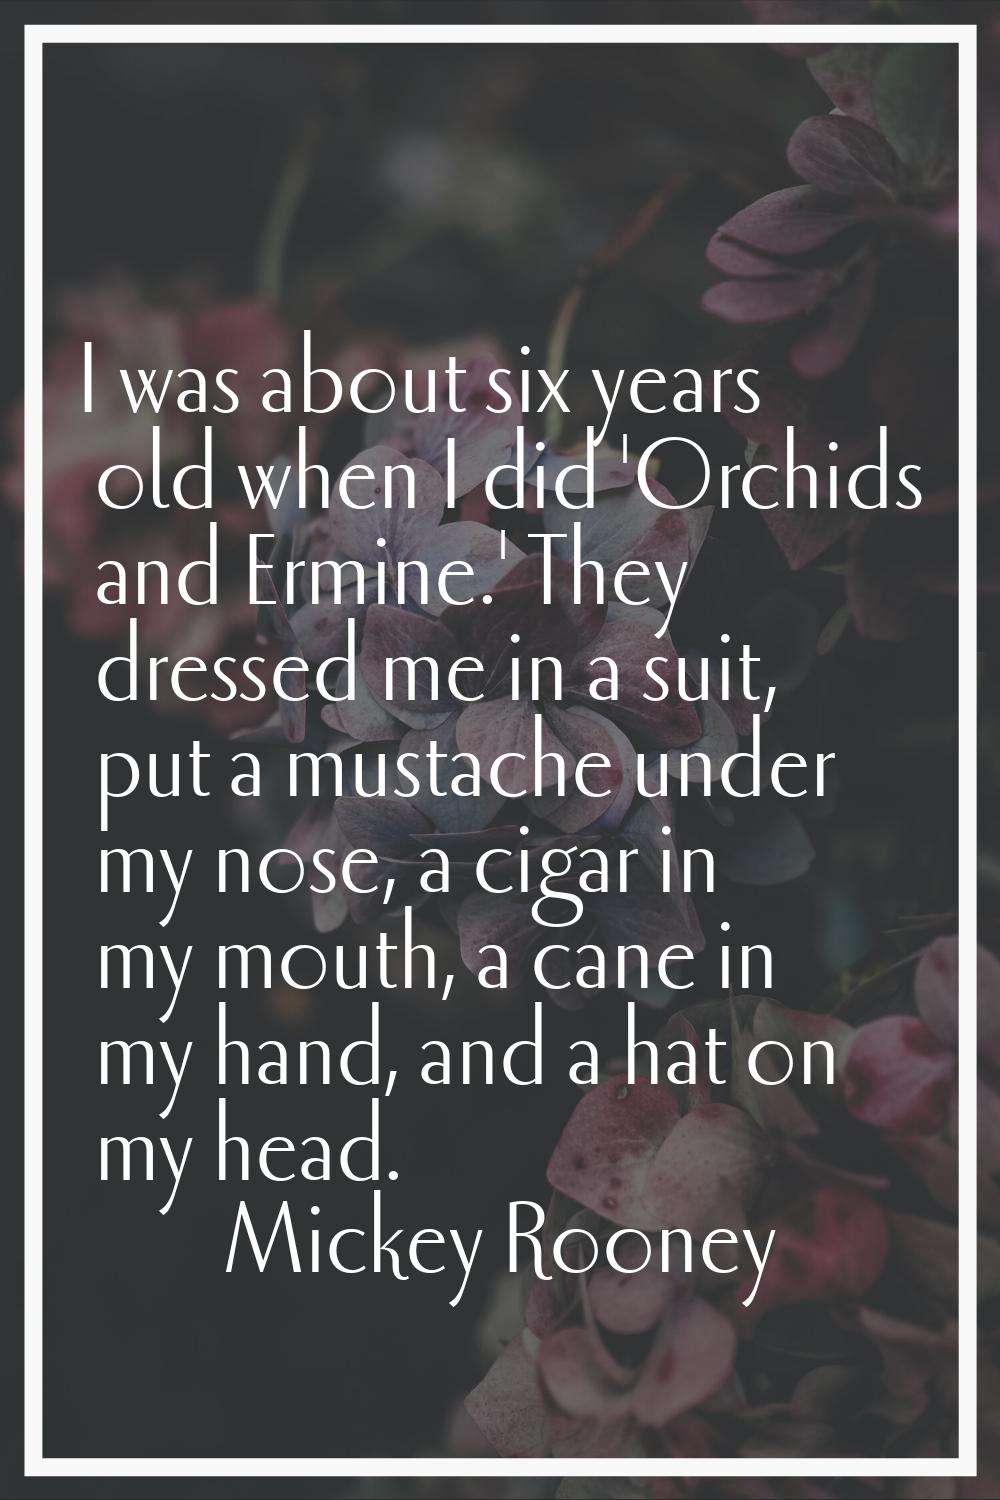 I was about six years old when I did 'Orchids and Ermine.' They dressed me in a suit, put a mustach